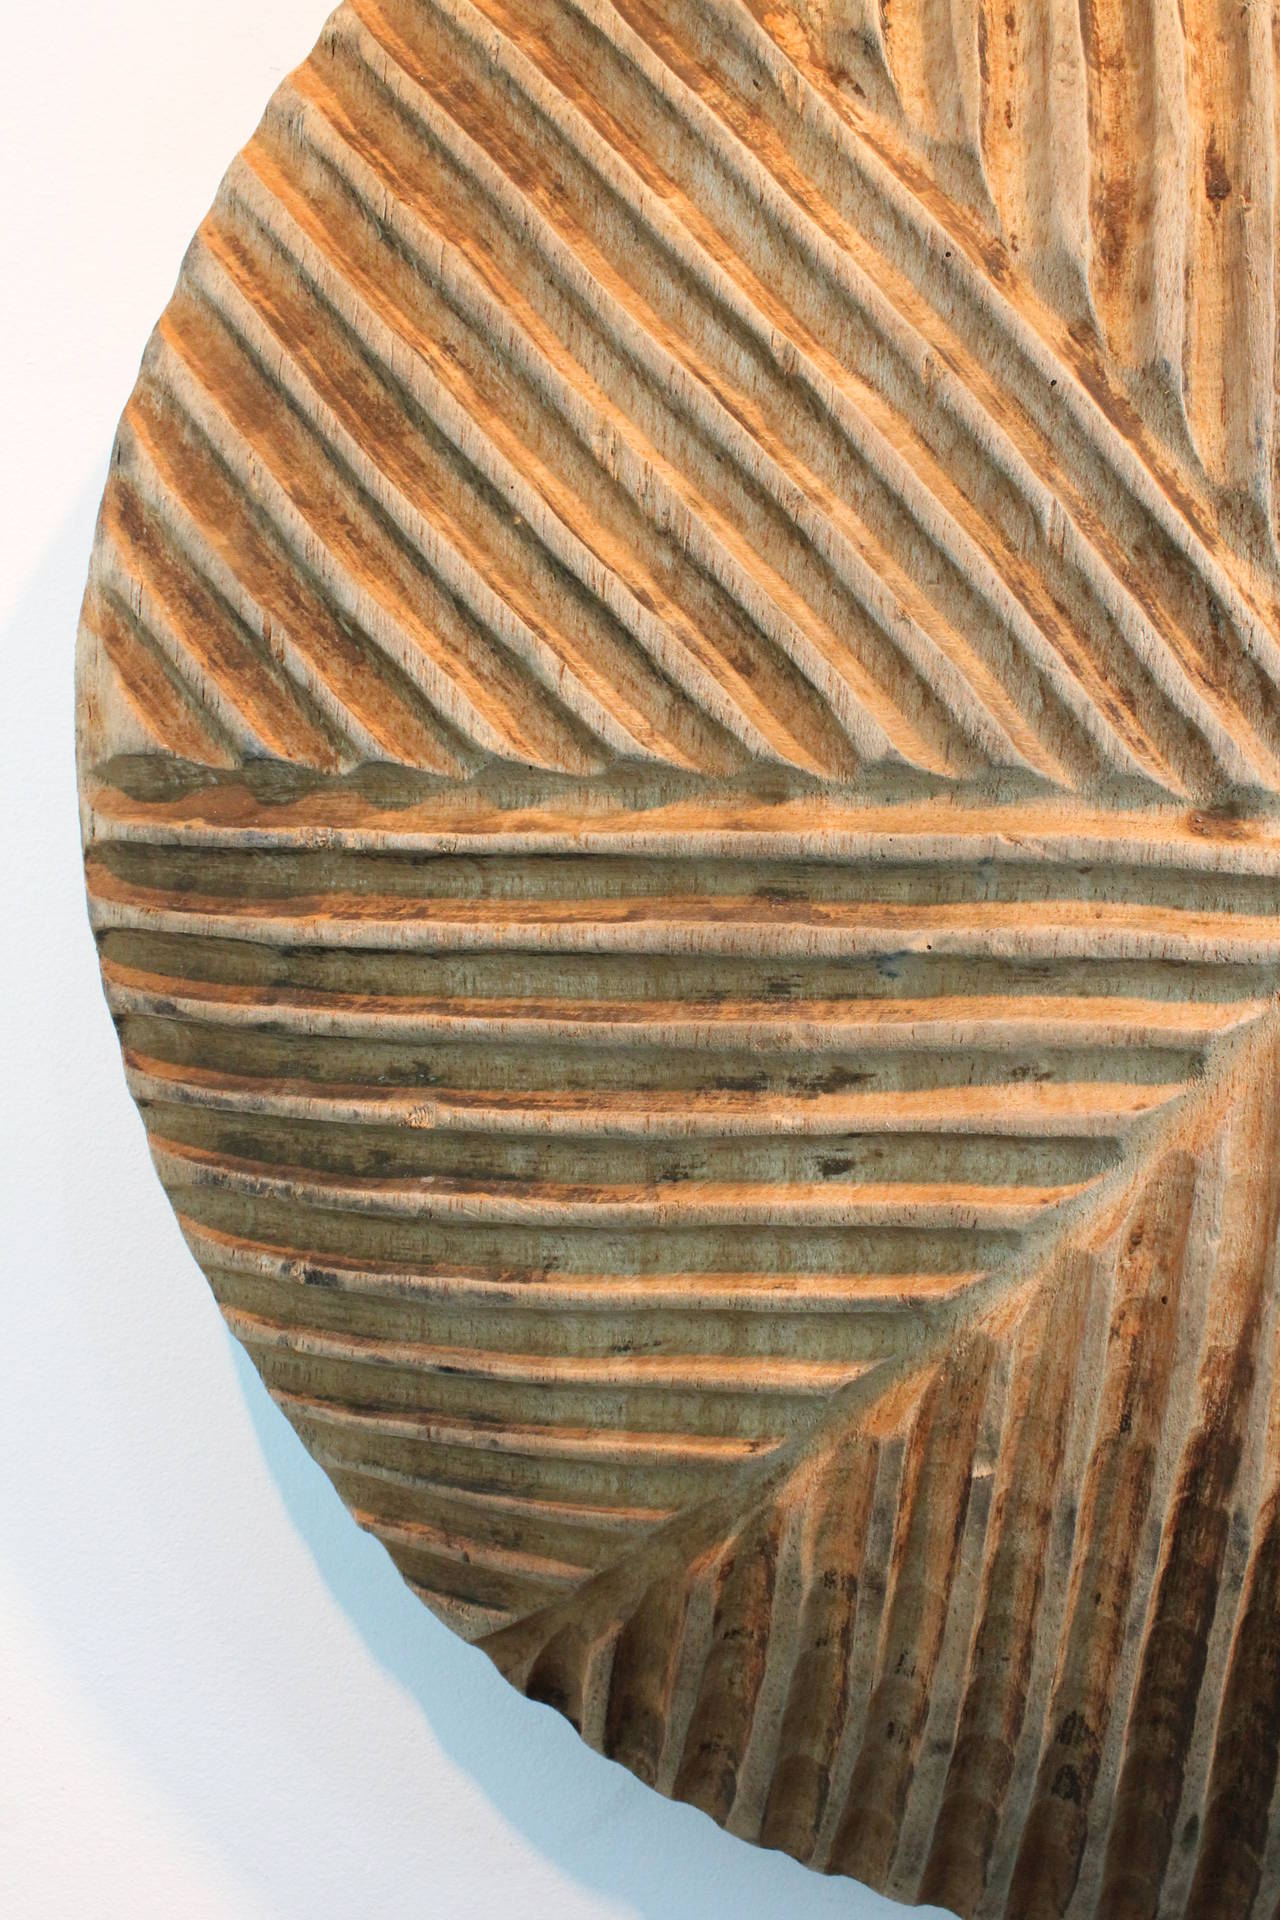 Wonderful graphic carved Congo shield.
Exceptional patina and form.
The design consists of a series of carved parallel angular gouges played against each other.
The form of the shield is bowed , not flat. The center is deeper than the edges.